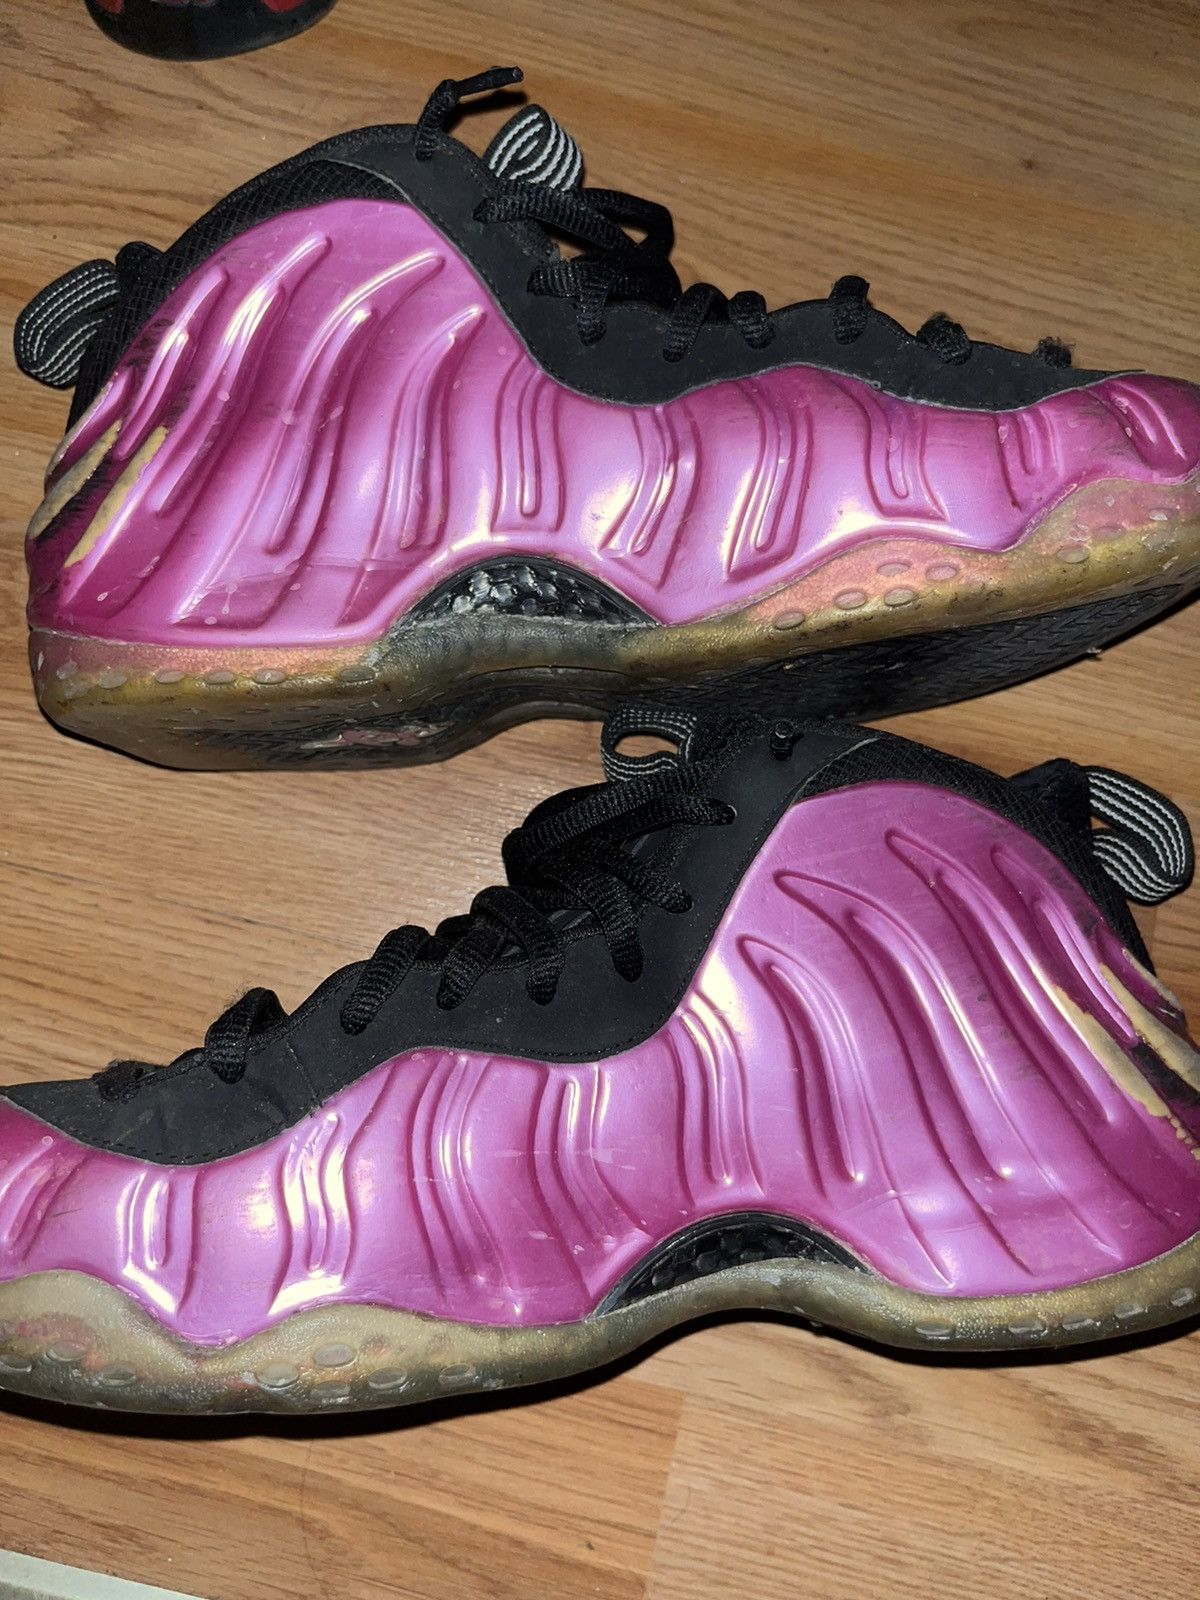 Nike nike air foamposite one pink Size US 10 / EU 43 - 2 Preview